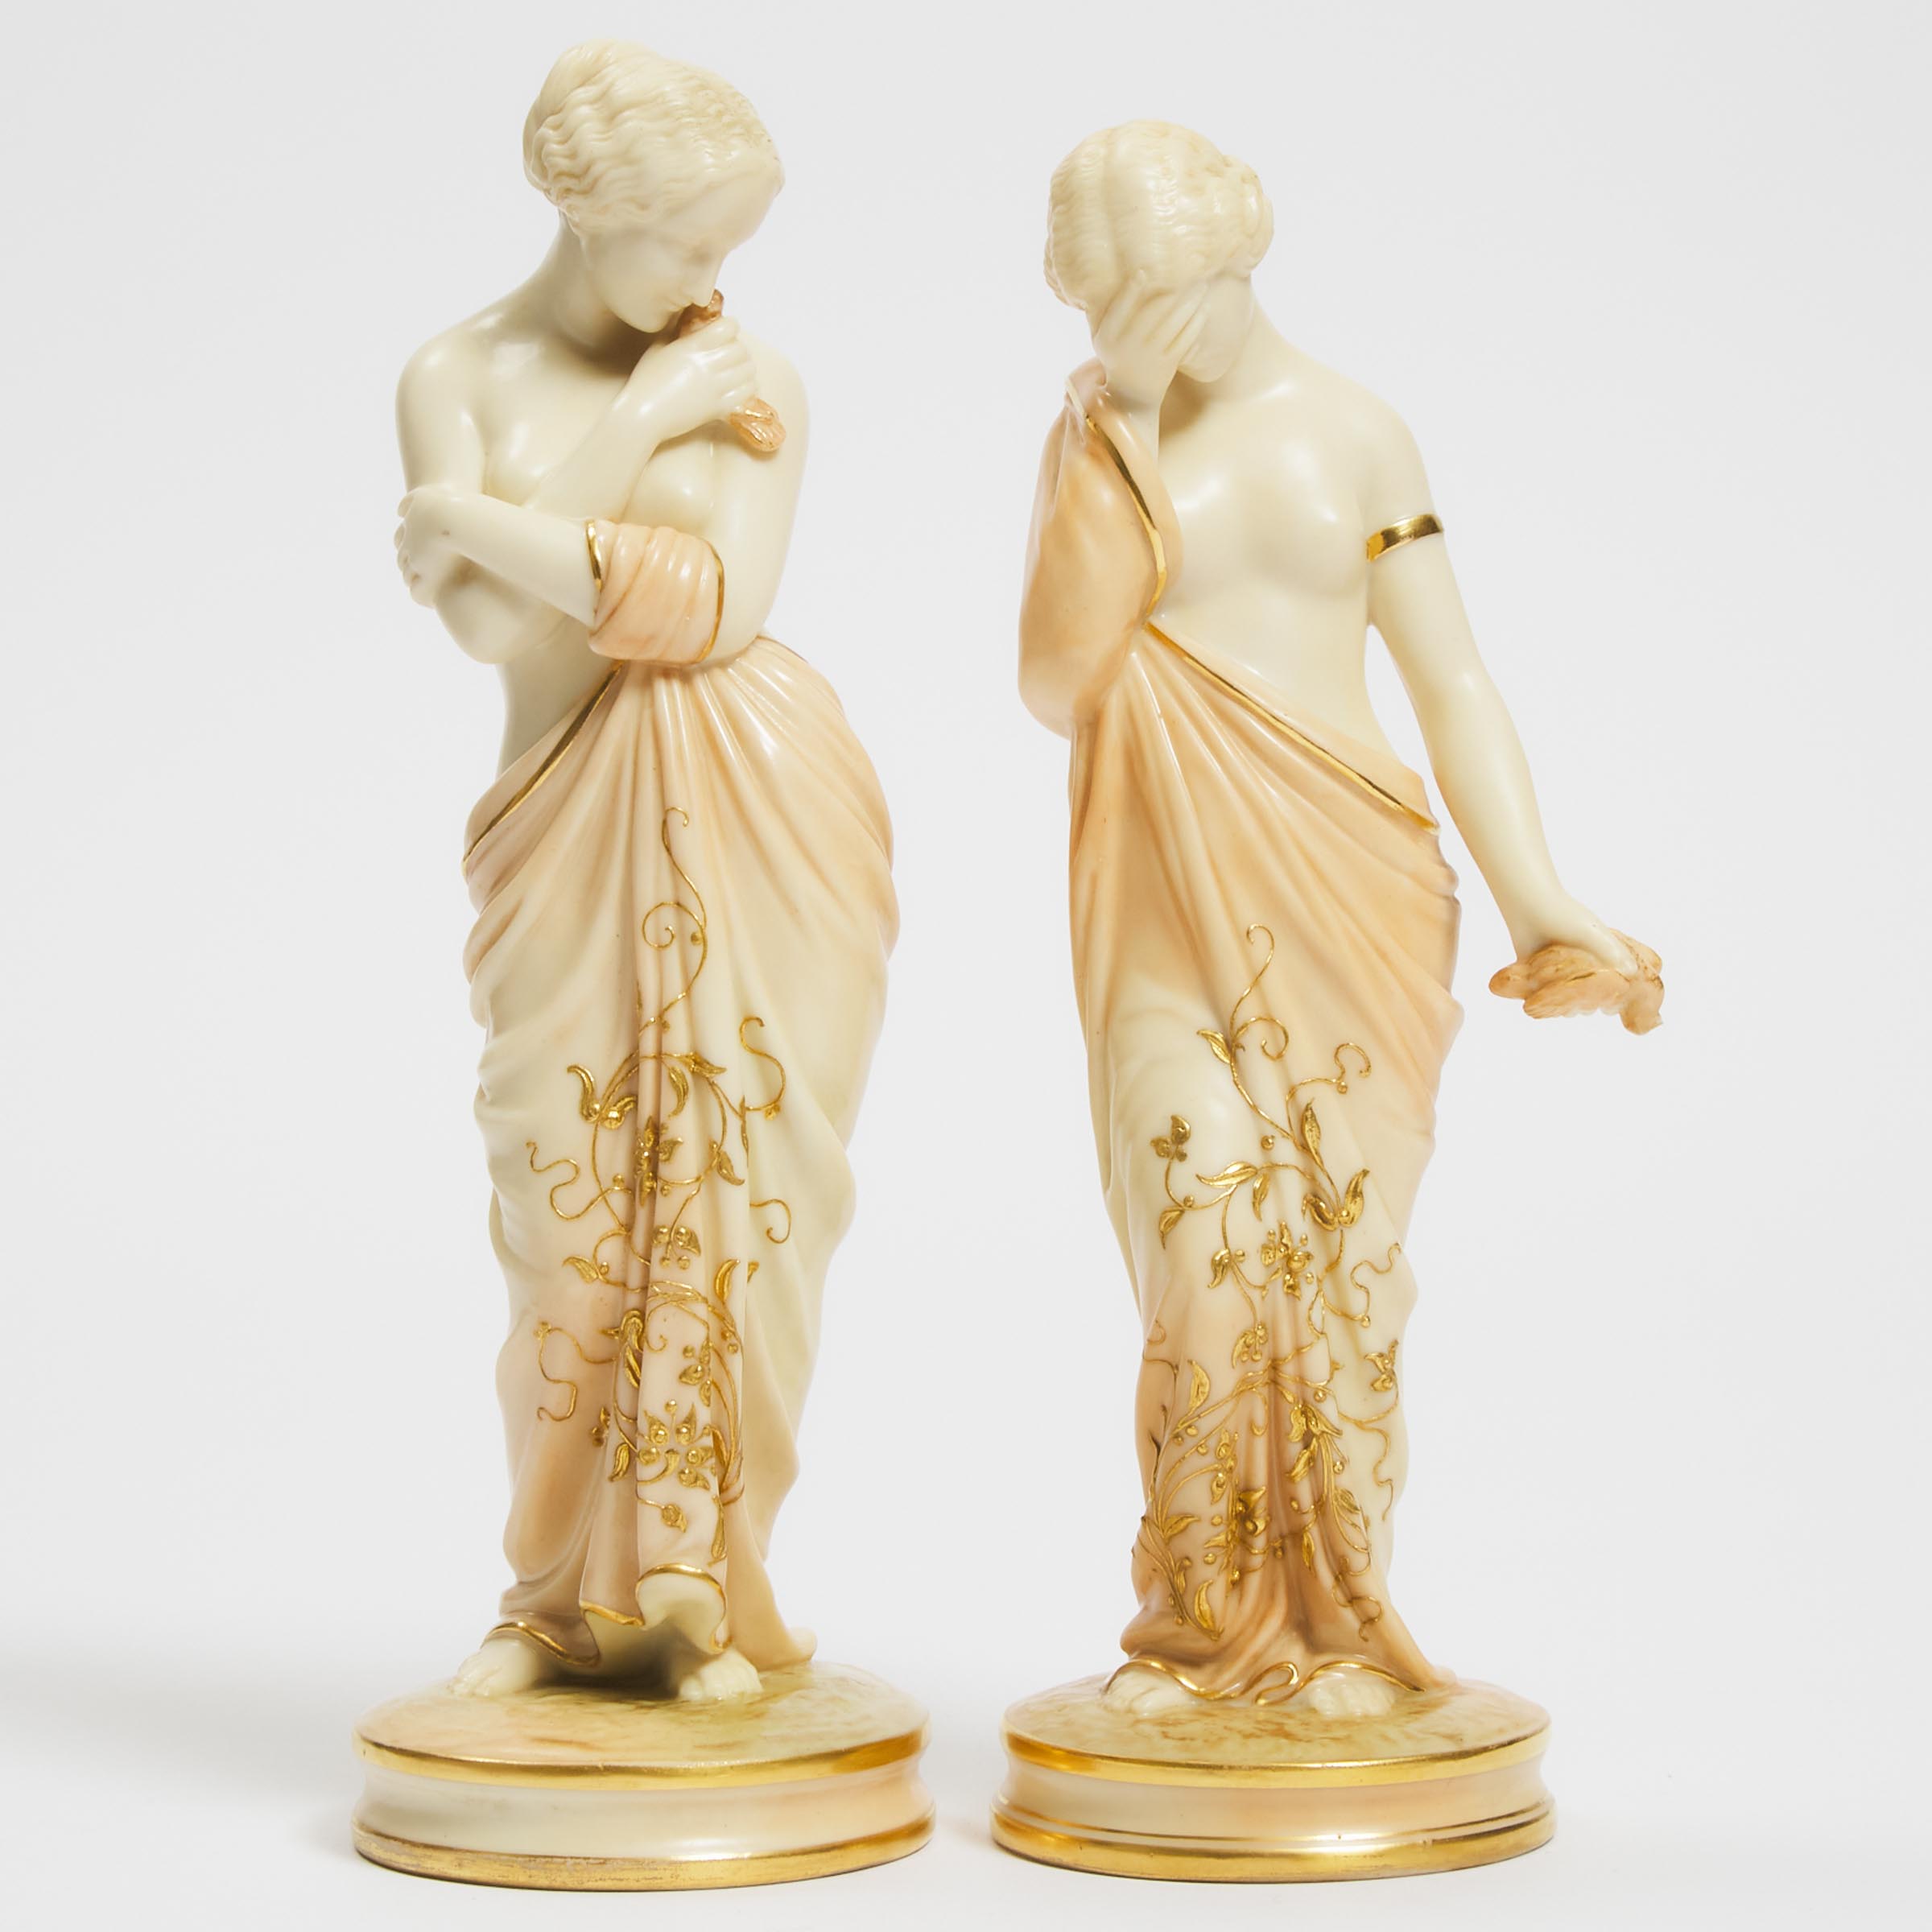 Pair of Royal Worcester Figures of 'Joy' and 'Sorrow', 1898/1900